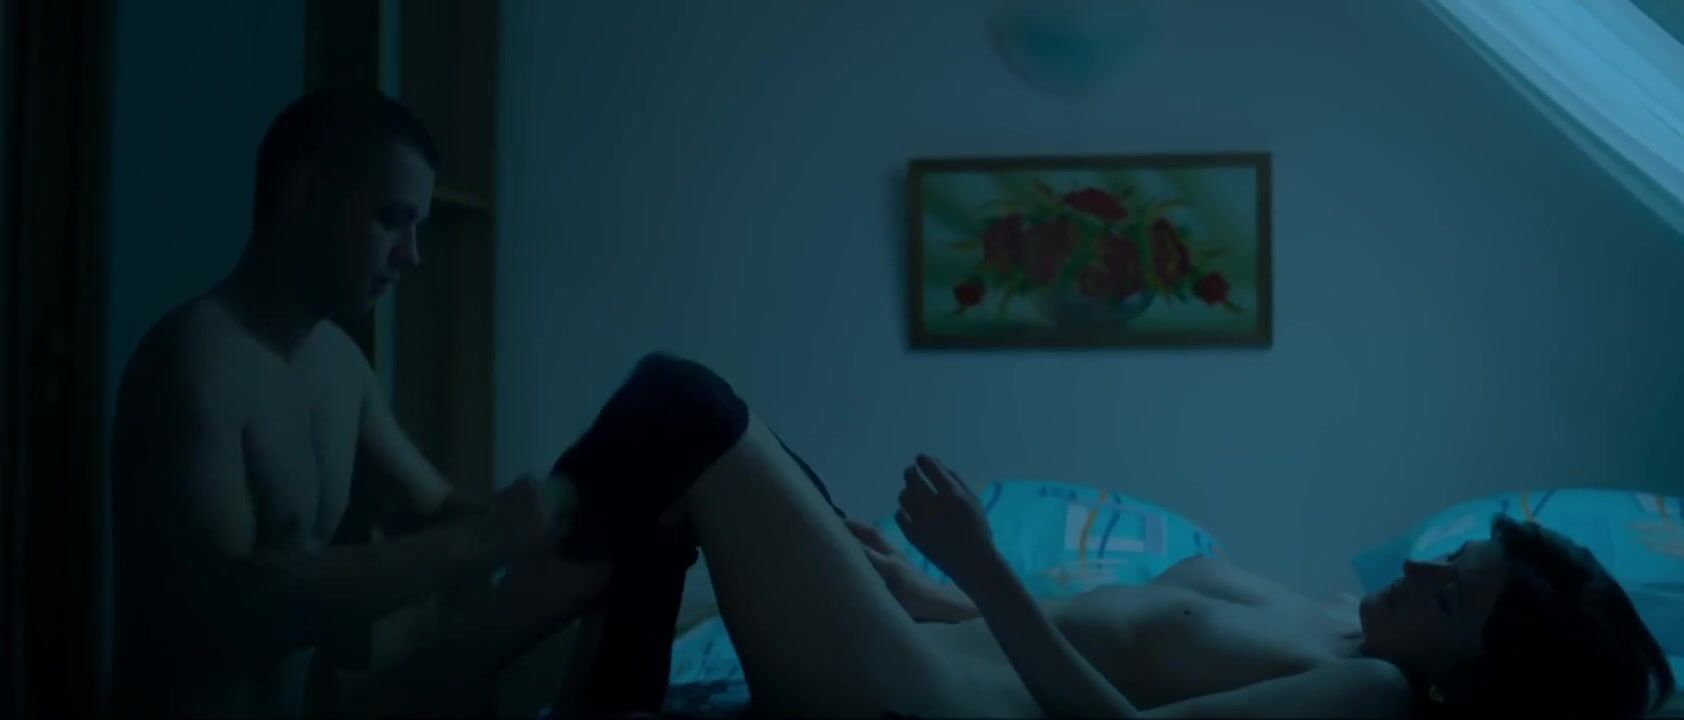 Fuck For Money Boy gives everything to Evgeniya Gromova just to hump her in Russian film Fidelity (2019) XNXX